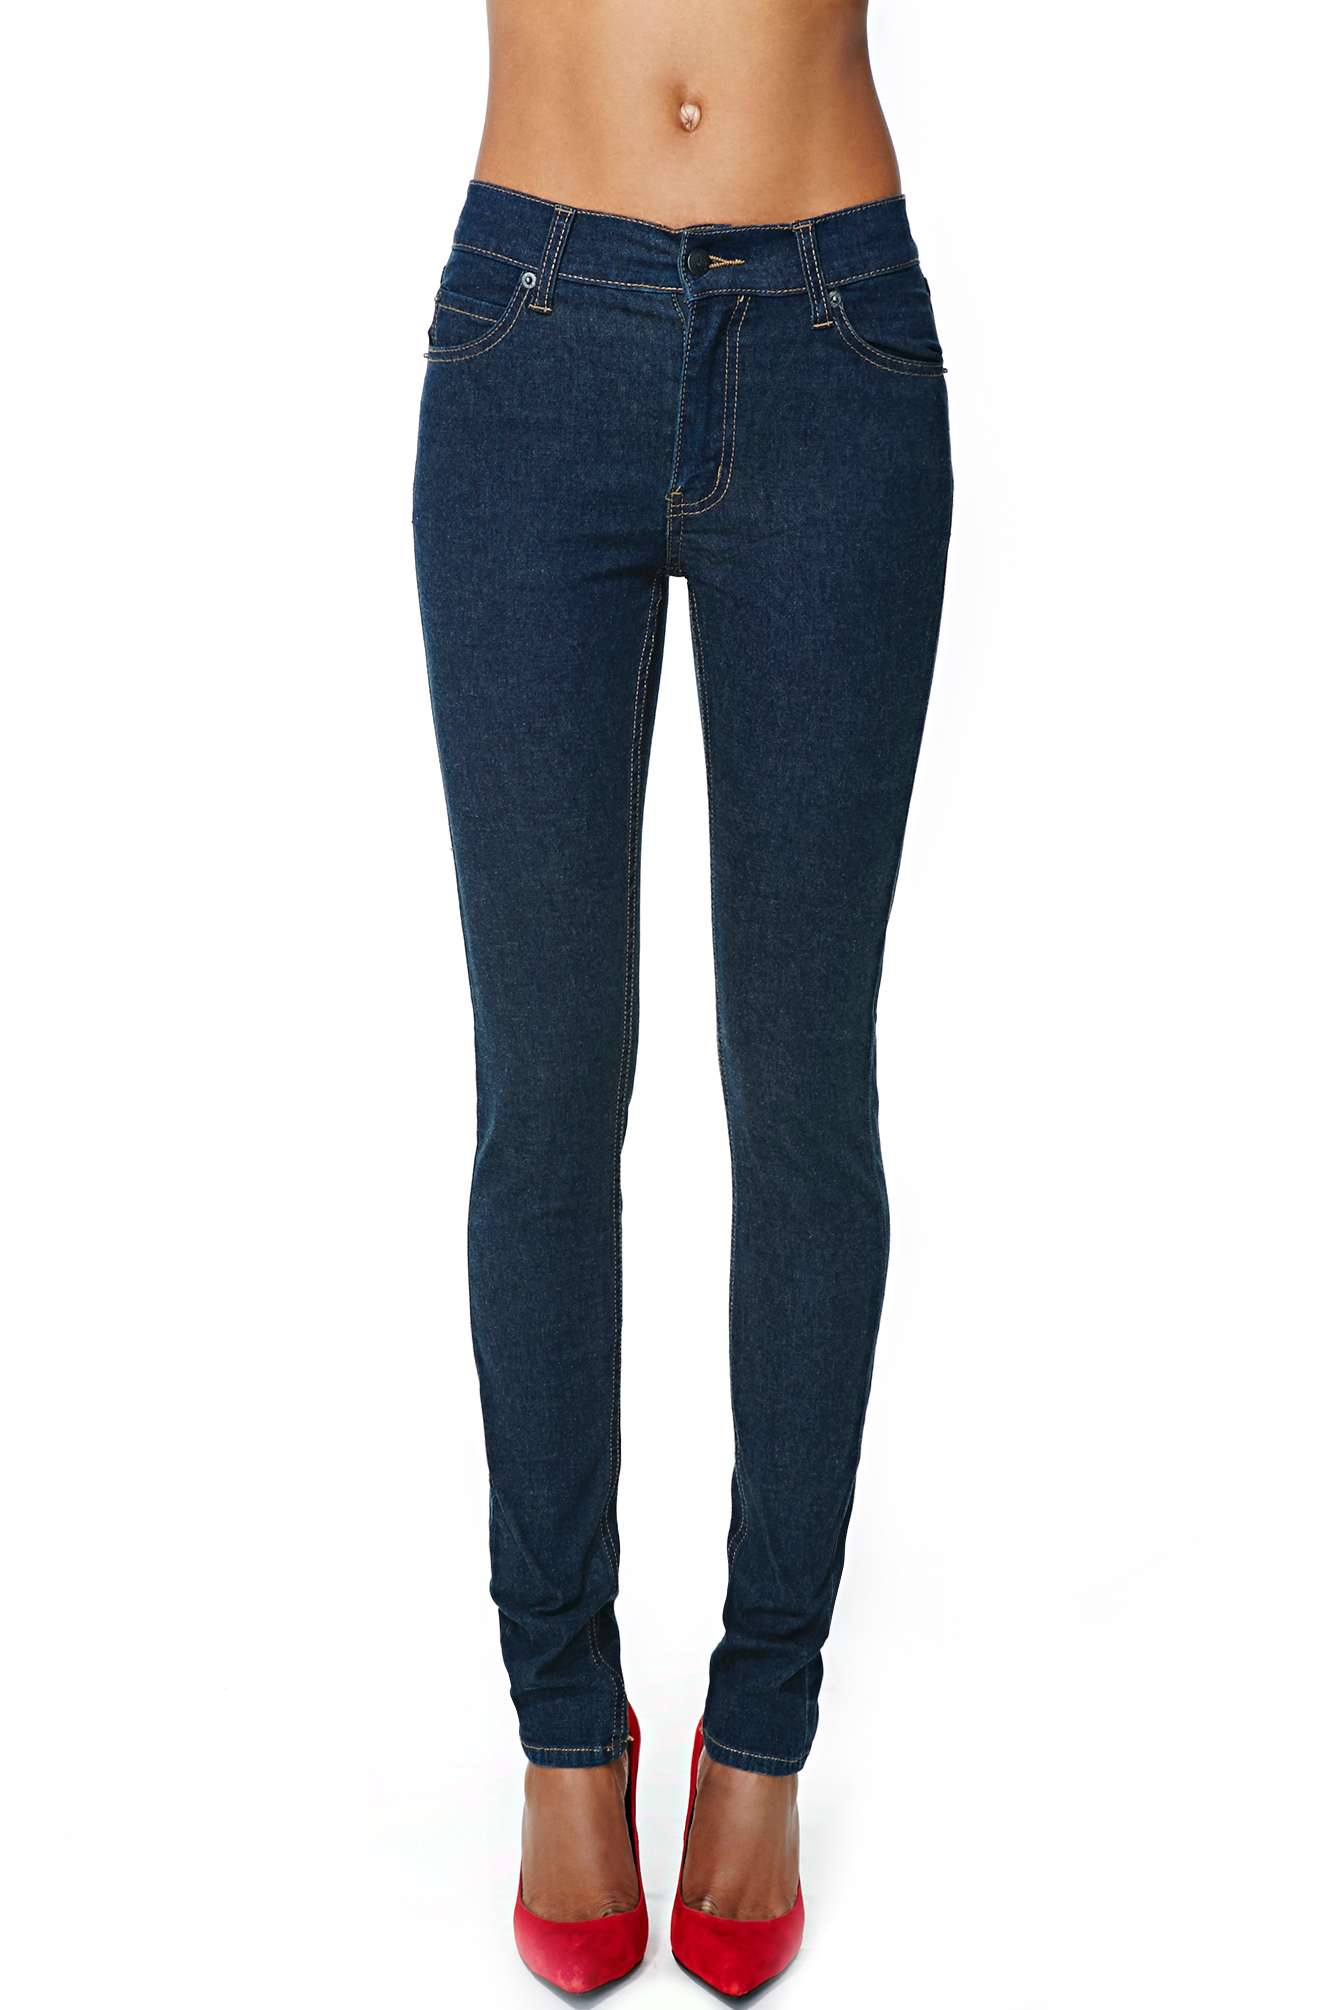 Nasty Gal Blue Cheap Monday Tight Skinny Jeans Very Stretch One Wash Product 1 17302879 0 731519551 Normal 